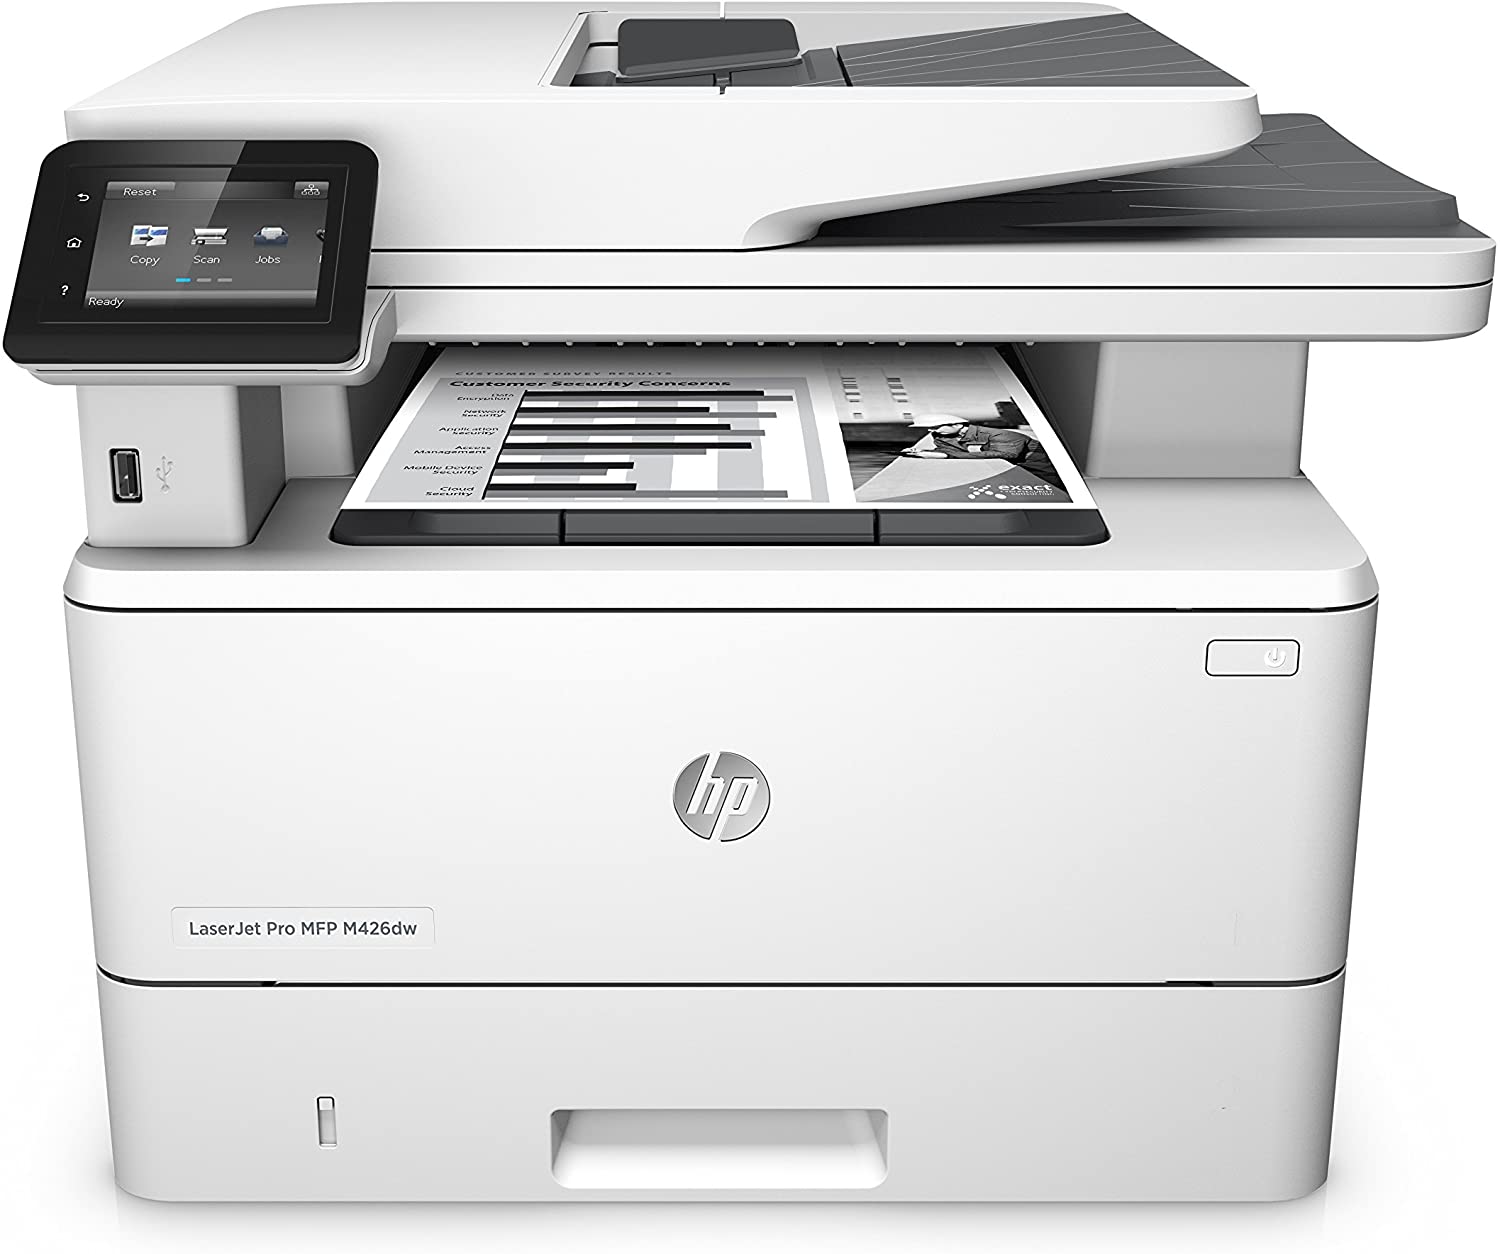 Buy HP Laserjet Pro 102A Printer Essencial in carrying out all type of printing get yours now at machito Gadgets and enjoy..